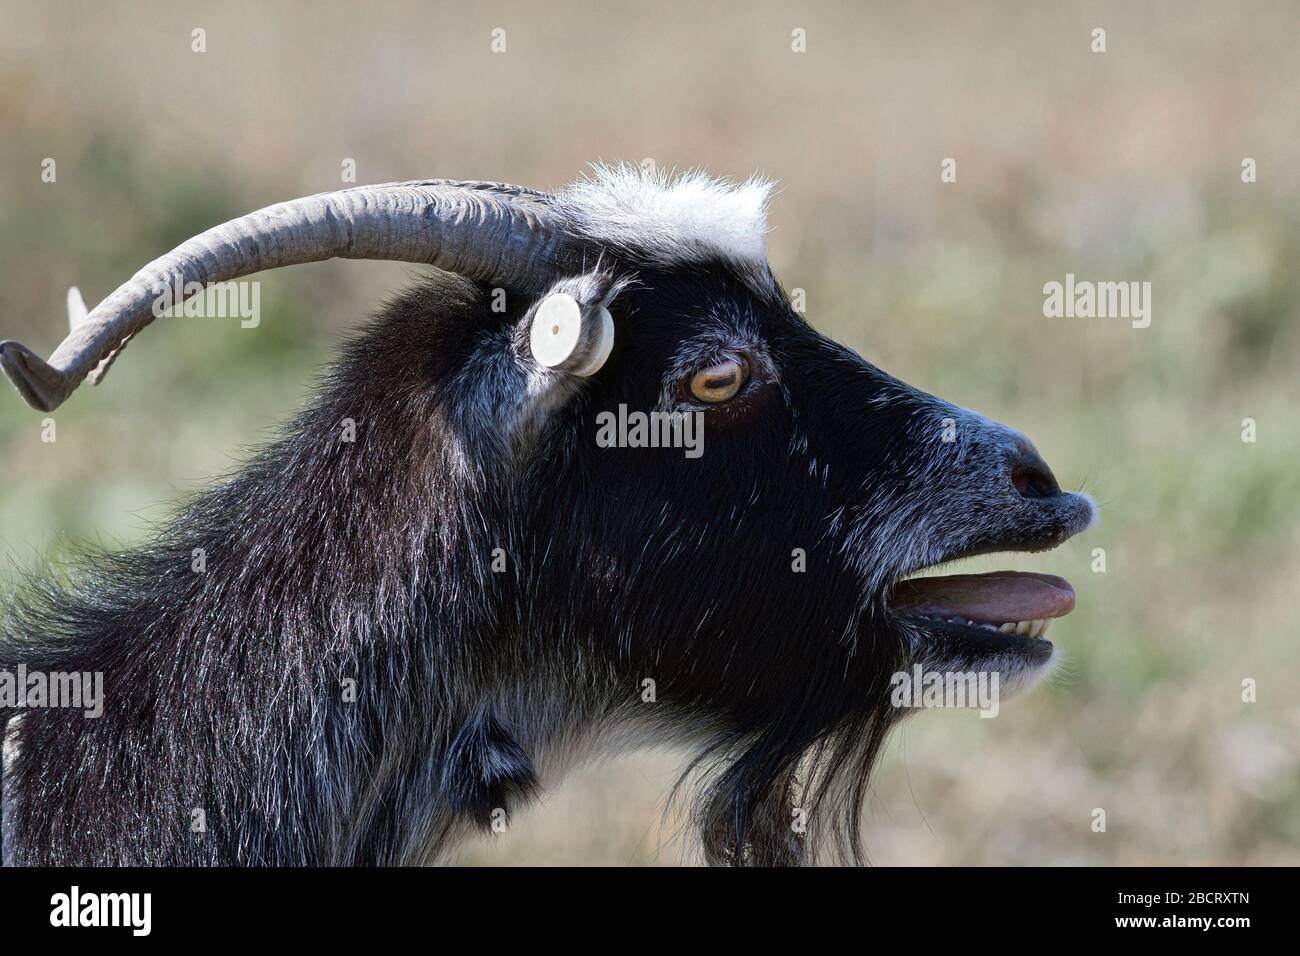 nervous billy goat portrait over out of focus background Stock Photo